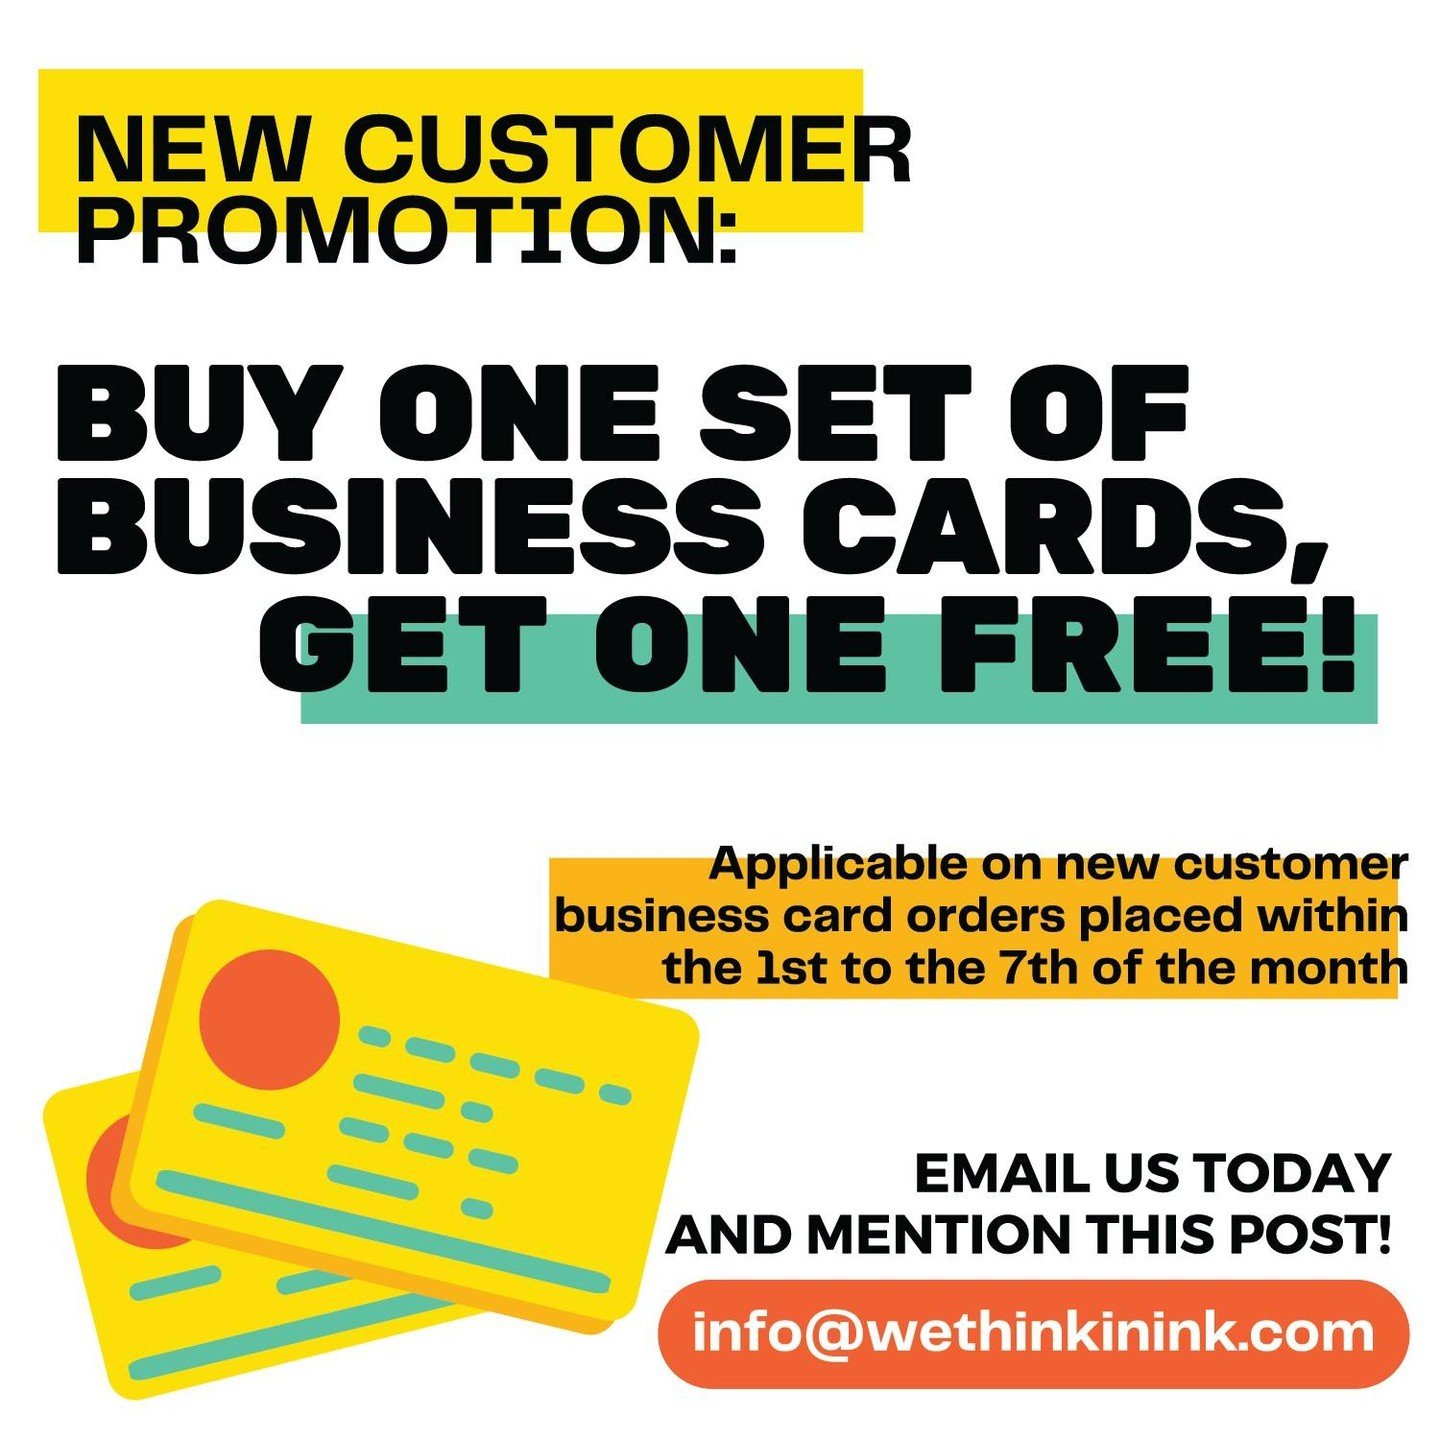 Double your professional presence! 🌟 From the 1st-7th of June, new customers can grab this deal: buy one set of business cards, get another set FREE! Don't miss out - order now!